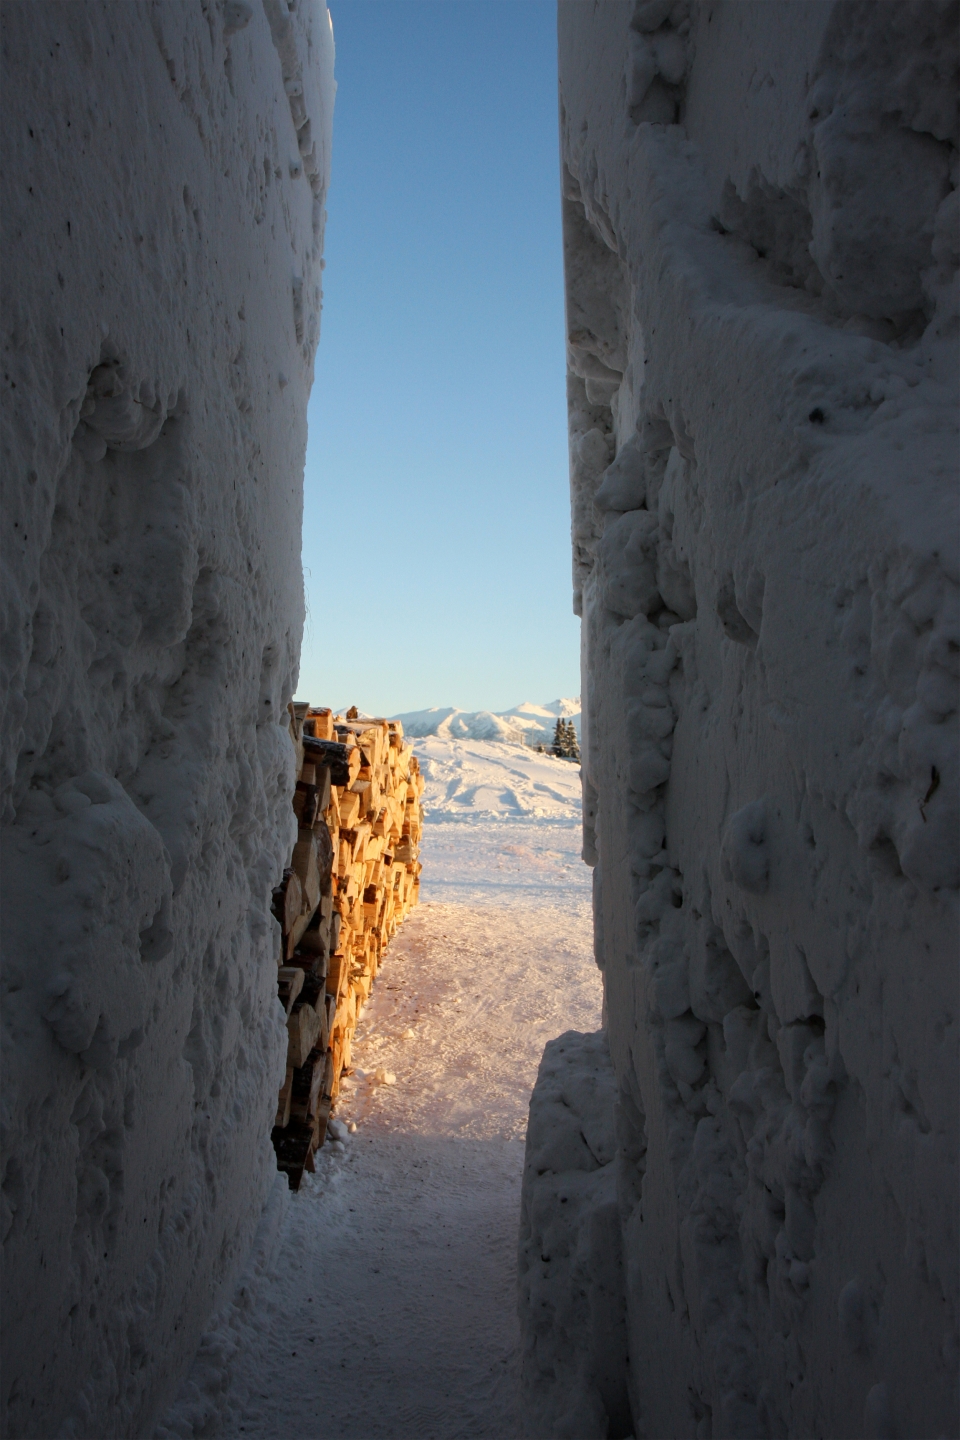 stacked firewood rests beside an opening between towering walls of snow. northern sky circle was an installation in Alaska designed by Stephanie Forsythe + Todd MacAllen, in collaboration with sound artist Ethan Rose.